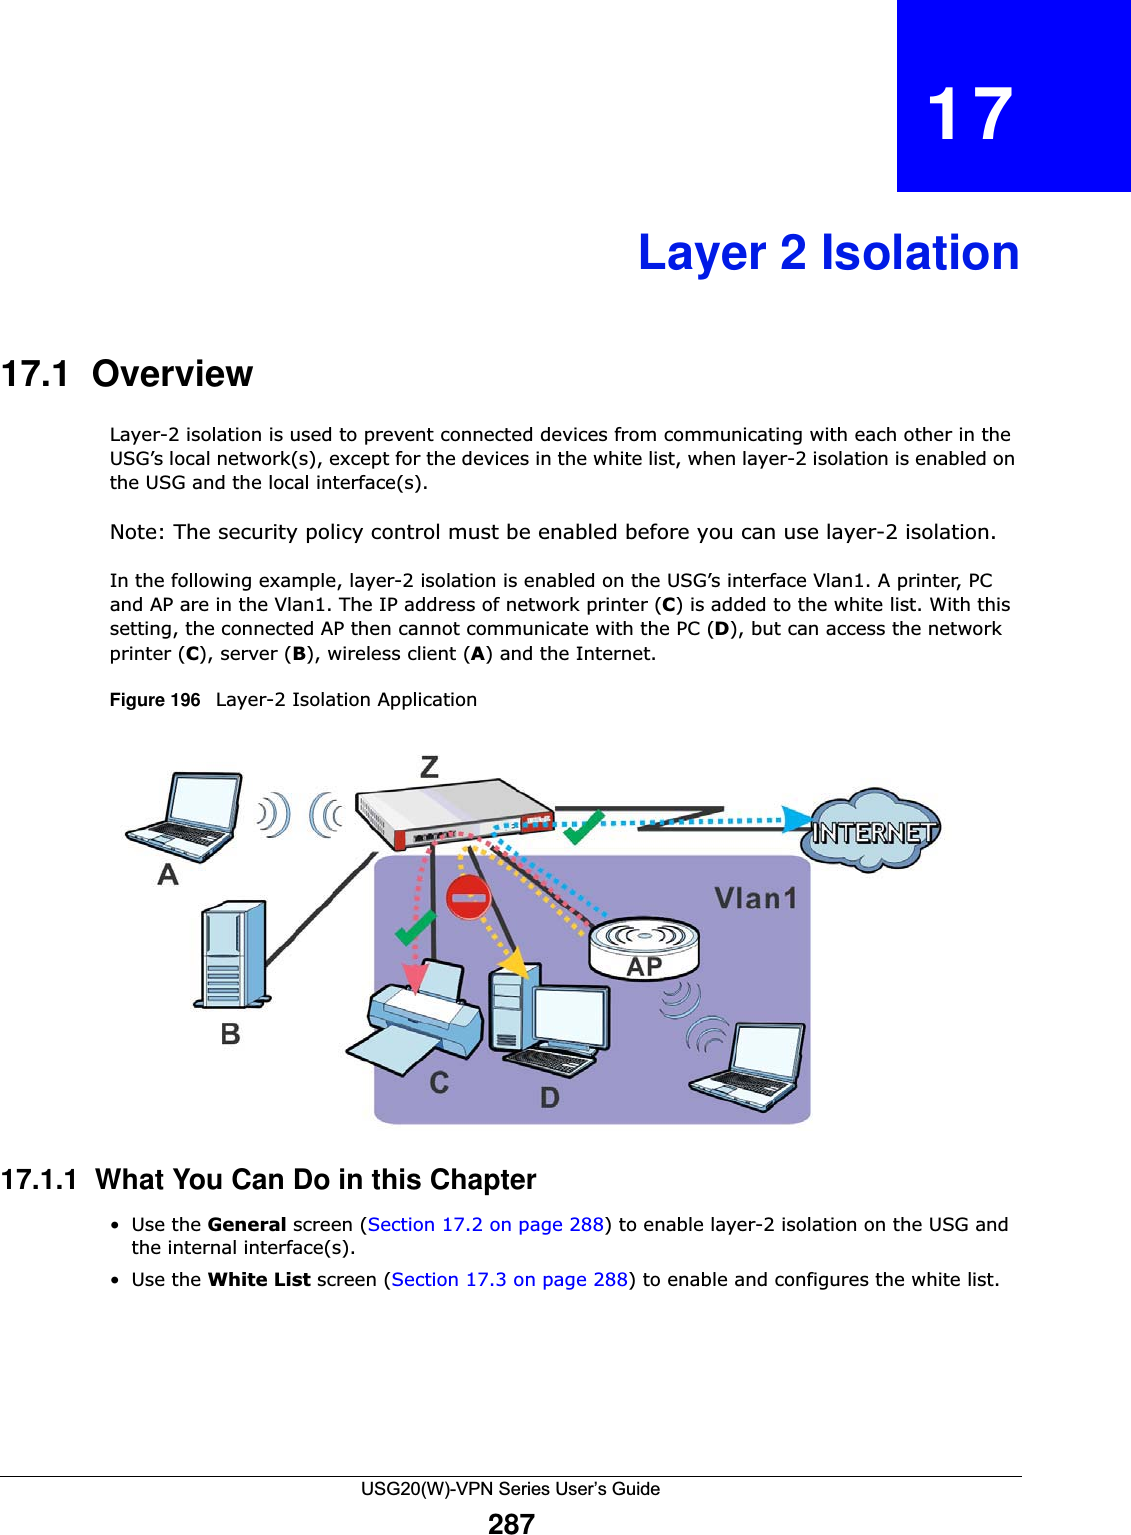 USG20(W)-VPN Series User’s Guide287CHAPTER   17Layer 2 Isolation17.1  OverviewLayer-2 isolation is used to prevent connected devices from communicating with each other in the USG’s local network(s), except for the devices in the white list, when layer-2 isolation is enabled on the USG and the local interface(s).Note: The security policy control must be enabled before you can use layer-2 isolation. In the following example, layer-2 isolation is enabled on the USG’s interface Vlan1. A printer, PC and AP are in the Vlan1. The IP address of network printer (C) is added to the white list. With this setting, the connected AP then cannot communicate with the PC (D), but can access the network printer (C), server (B), wireless client (A) and the Internet.Figure 196   Layer-2 Isolation Application17.1.1  What You Can Do in this Chapter•Use the General screen (Section 17.2 on page 288) to enable layer-2 isolation on the USG and the internal interface(s).•Use the White List screen (Section 17.3 on page 288) to enable and configures the white list.